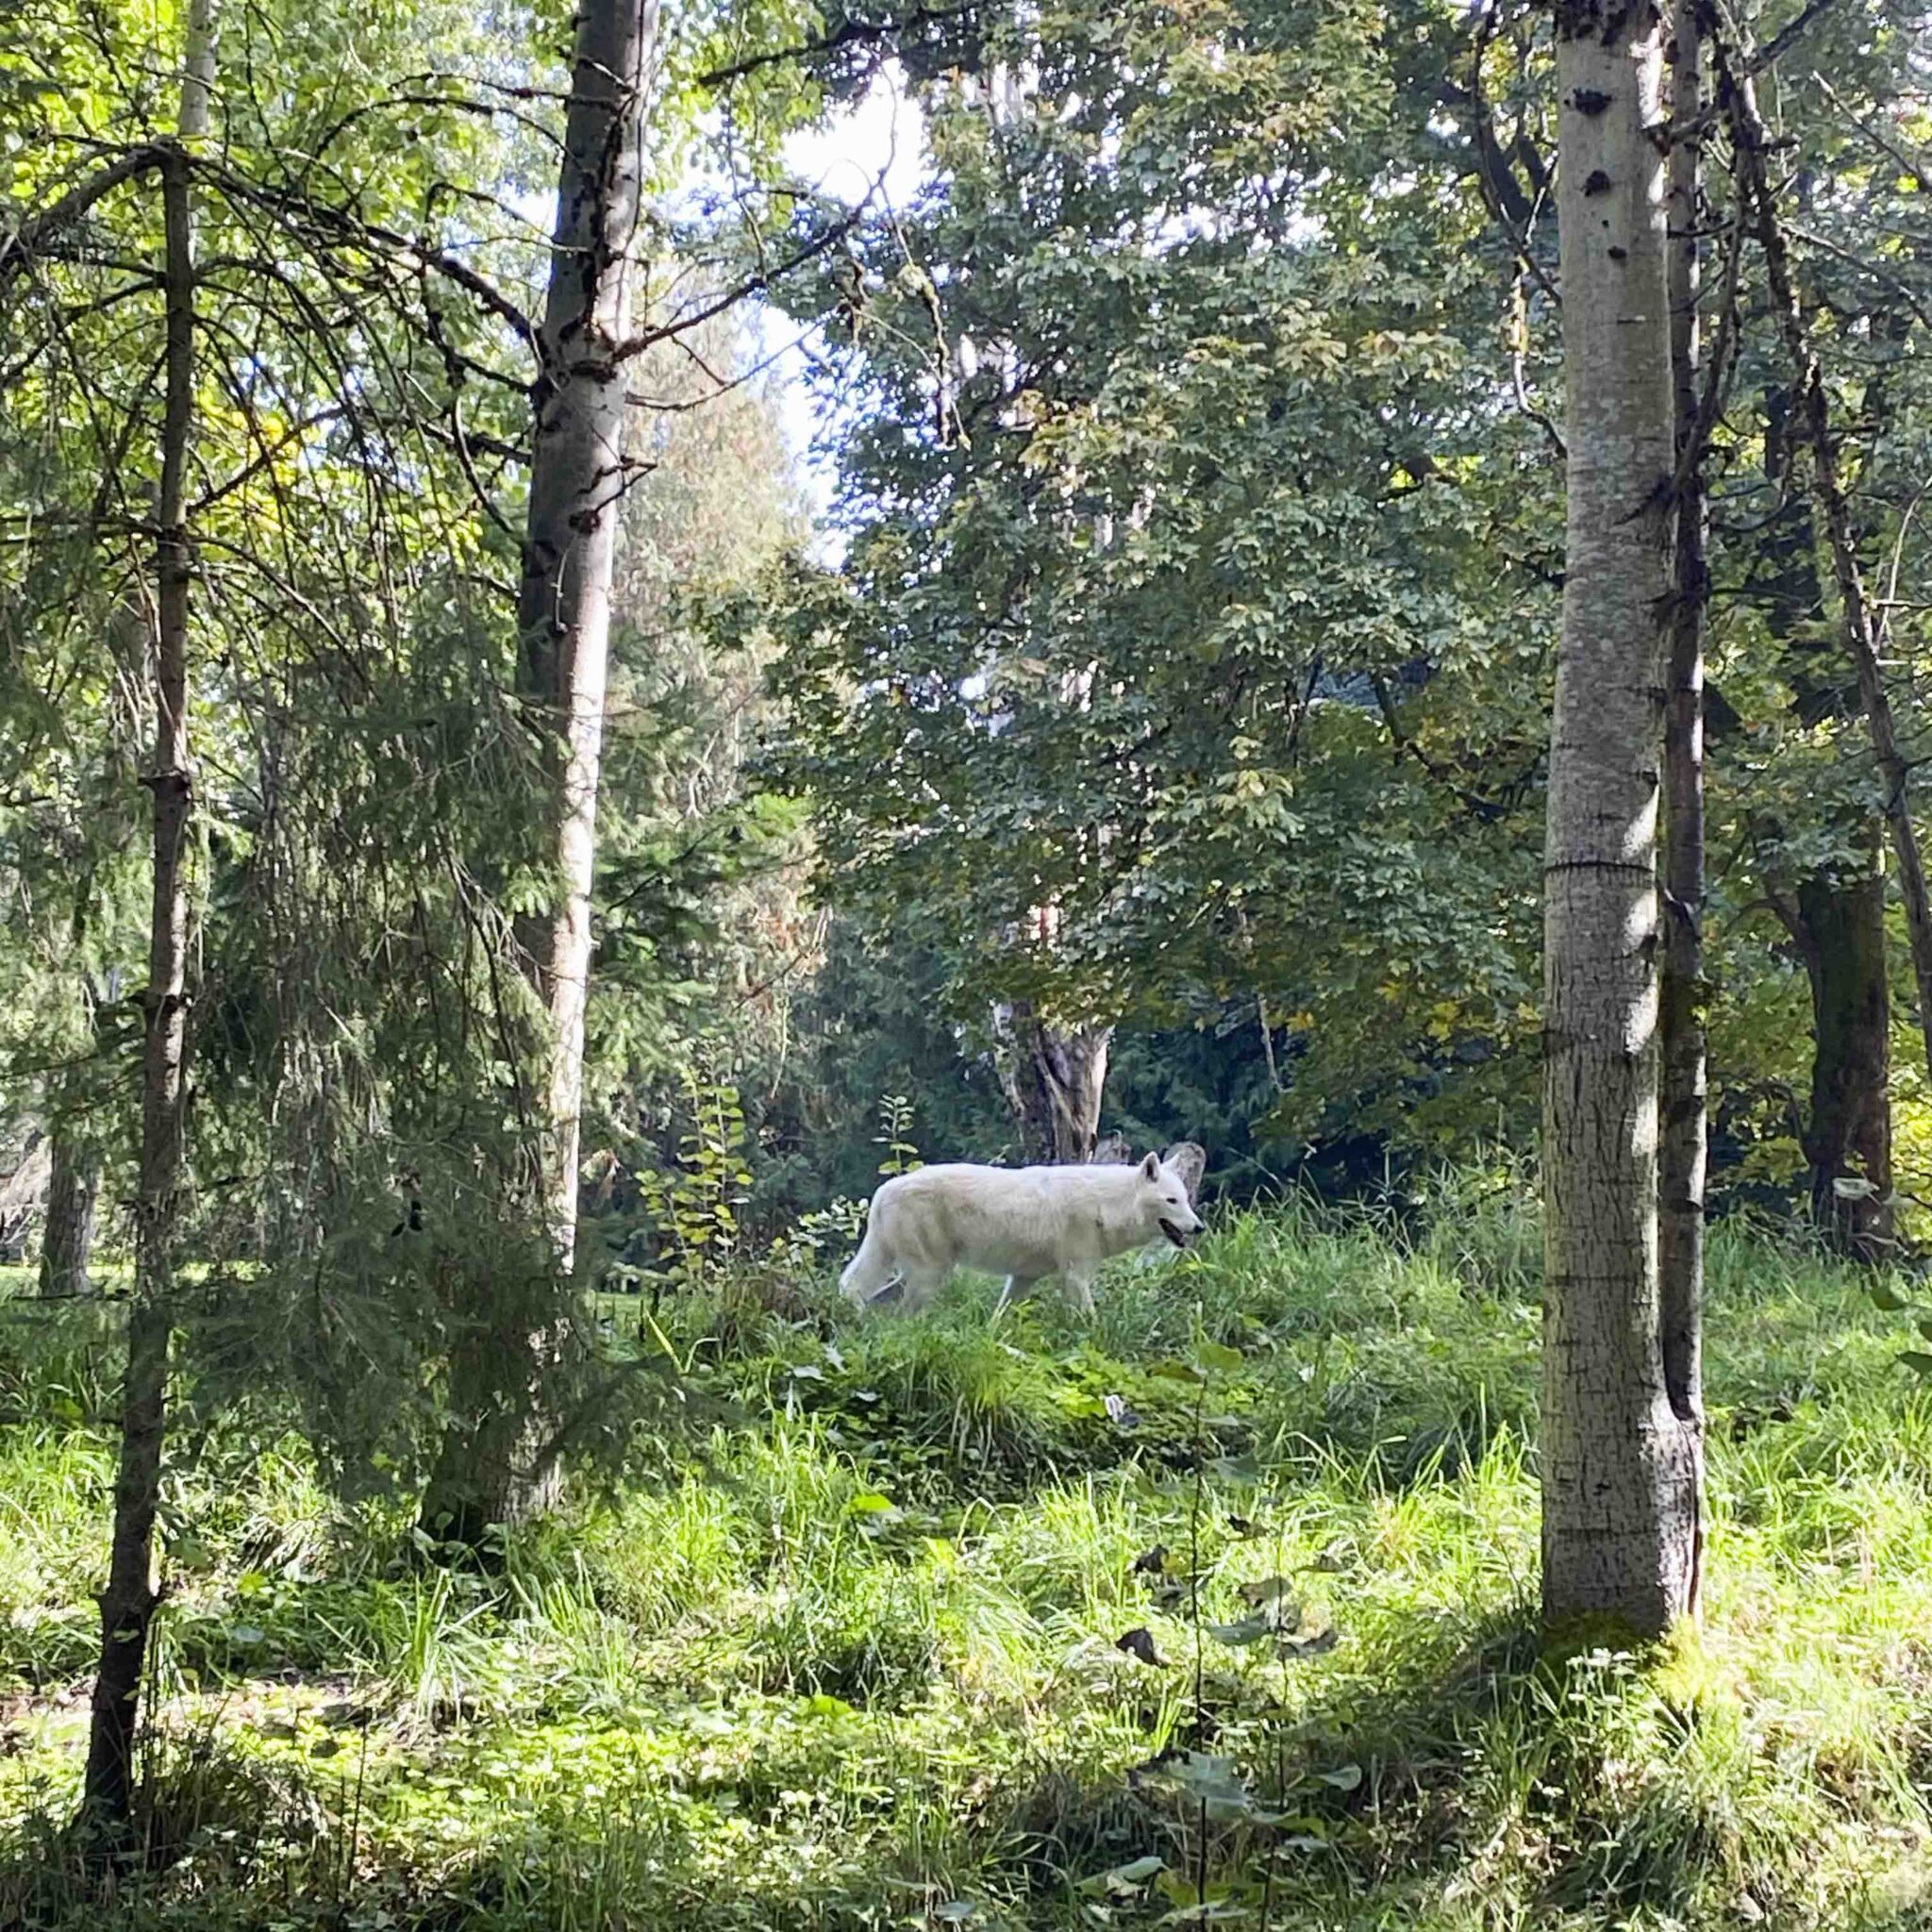 White wolf in the distance surrounded by tall evergreen trees at the zoo.